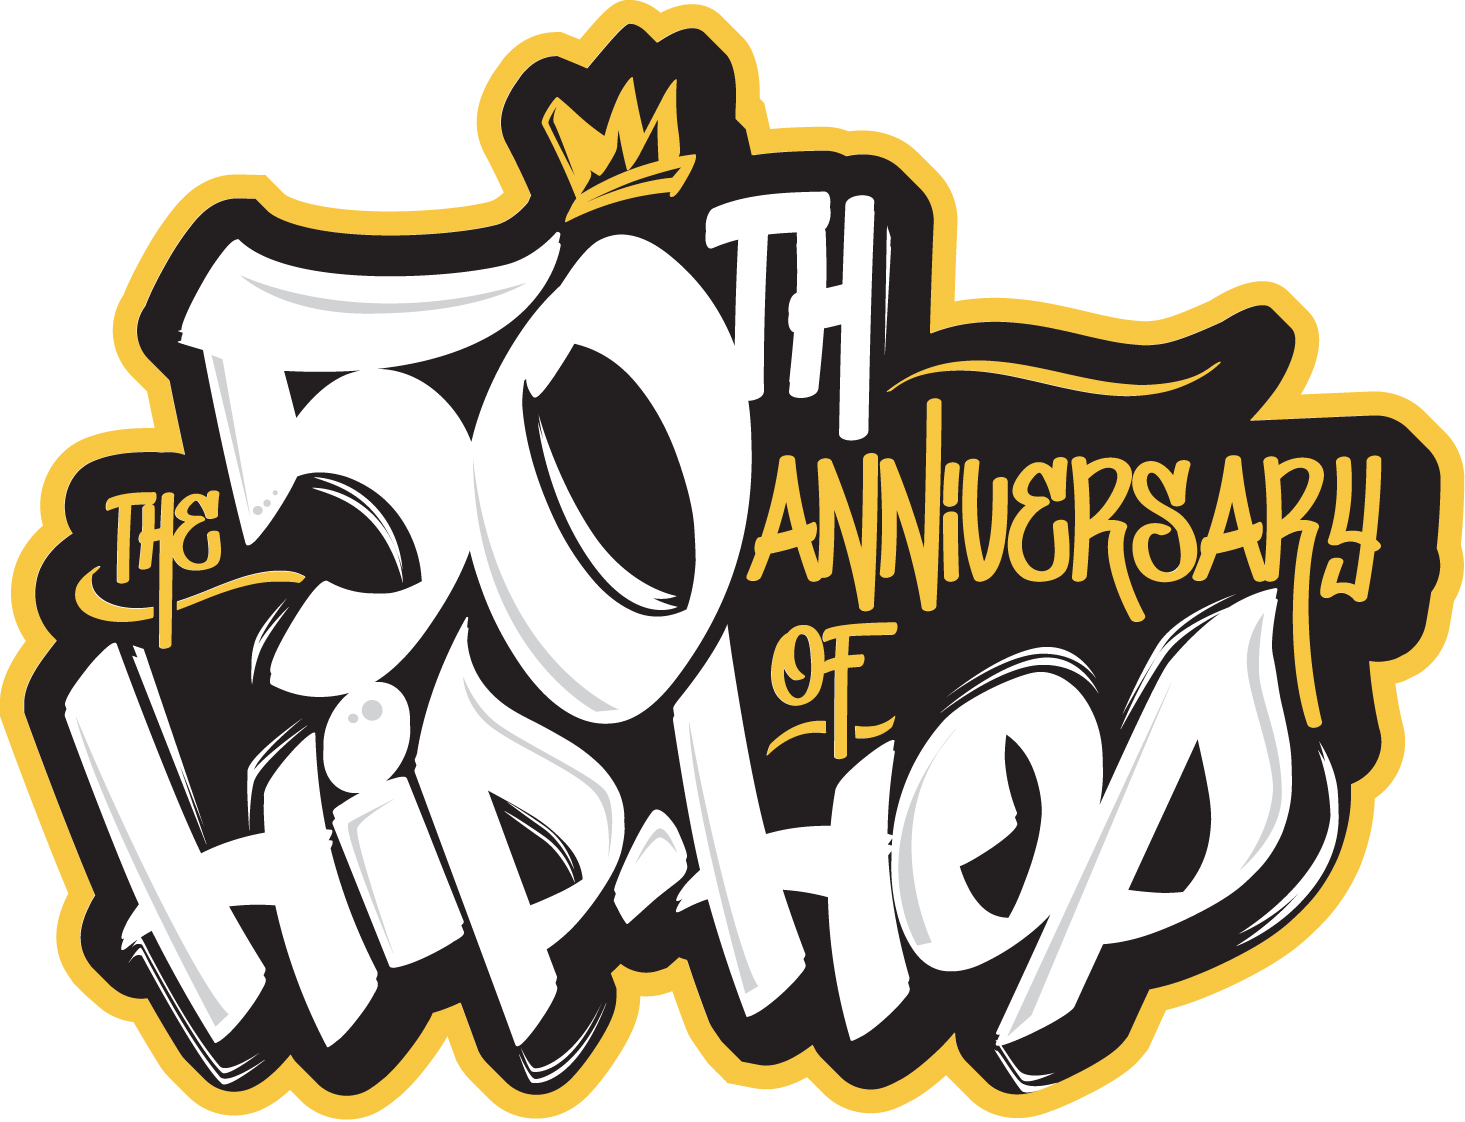 Rocket Appointed to Rep 50th Anniversary of Hip Hop in UK - The ...